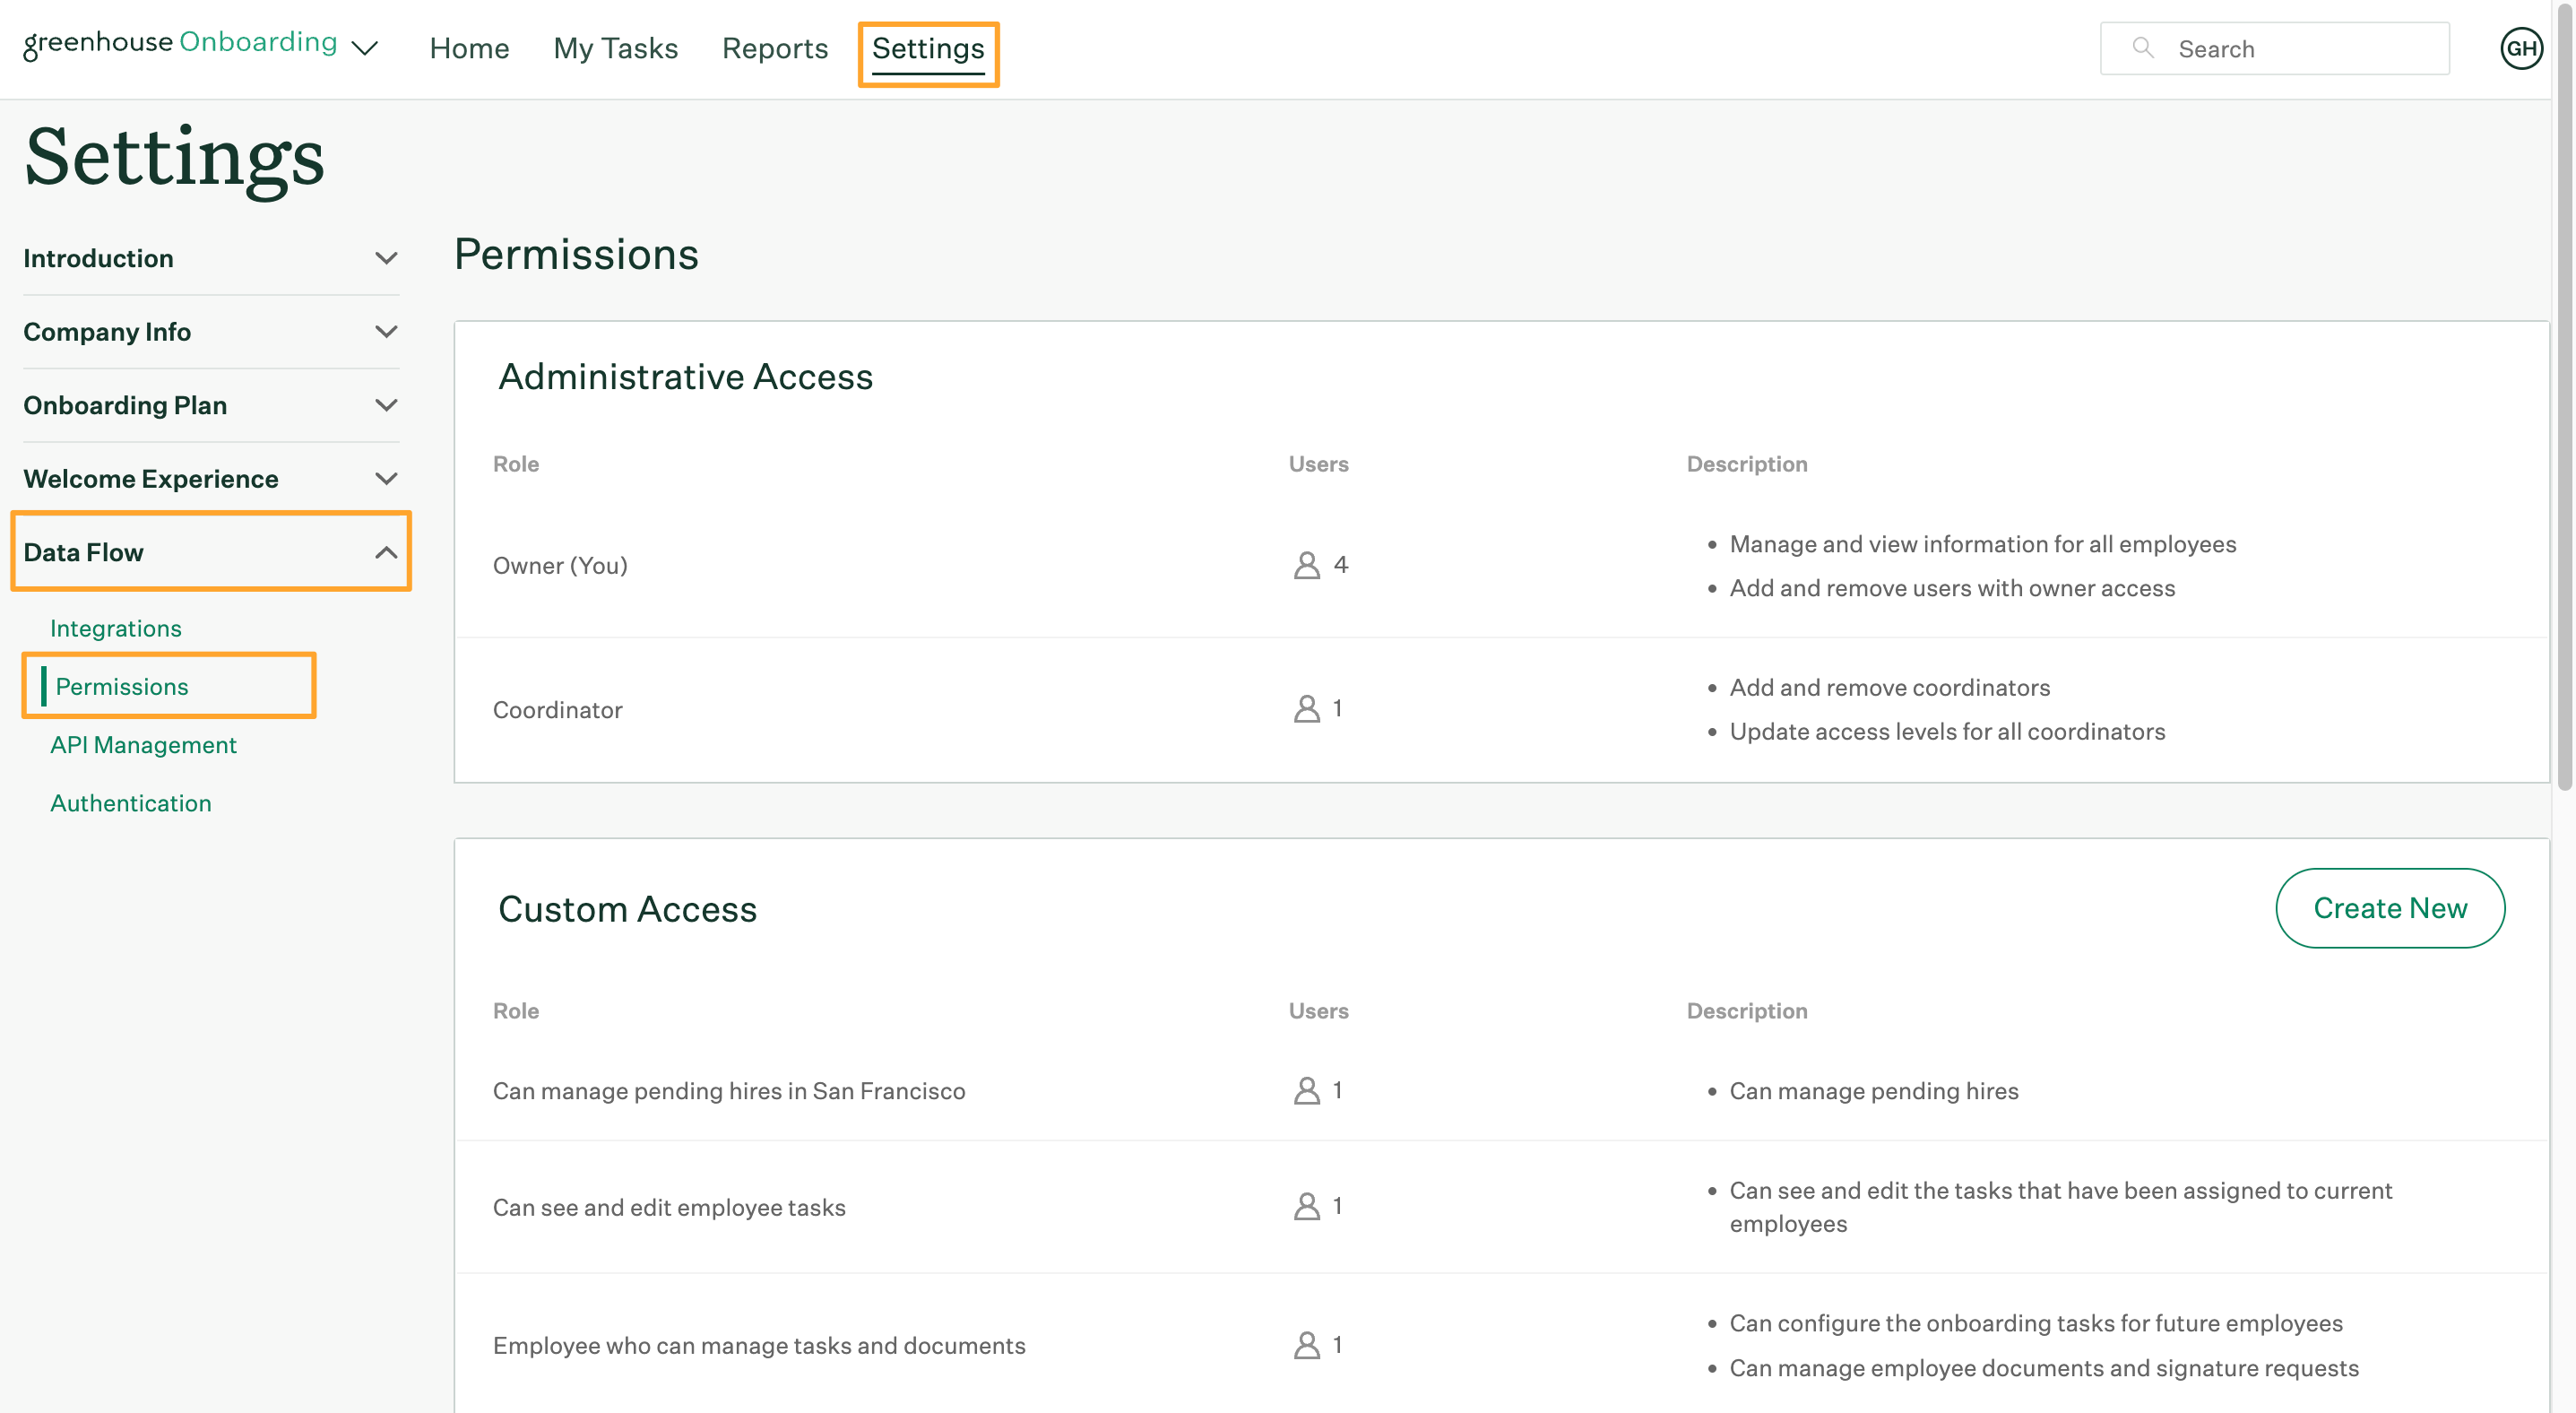 Greenhouse Onboarding Permissions page with Settings Data Flow and Permissions buttons highlighted